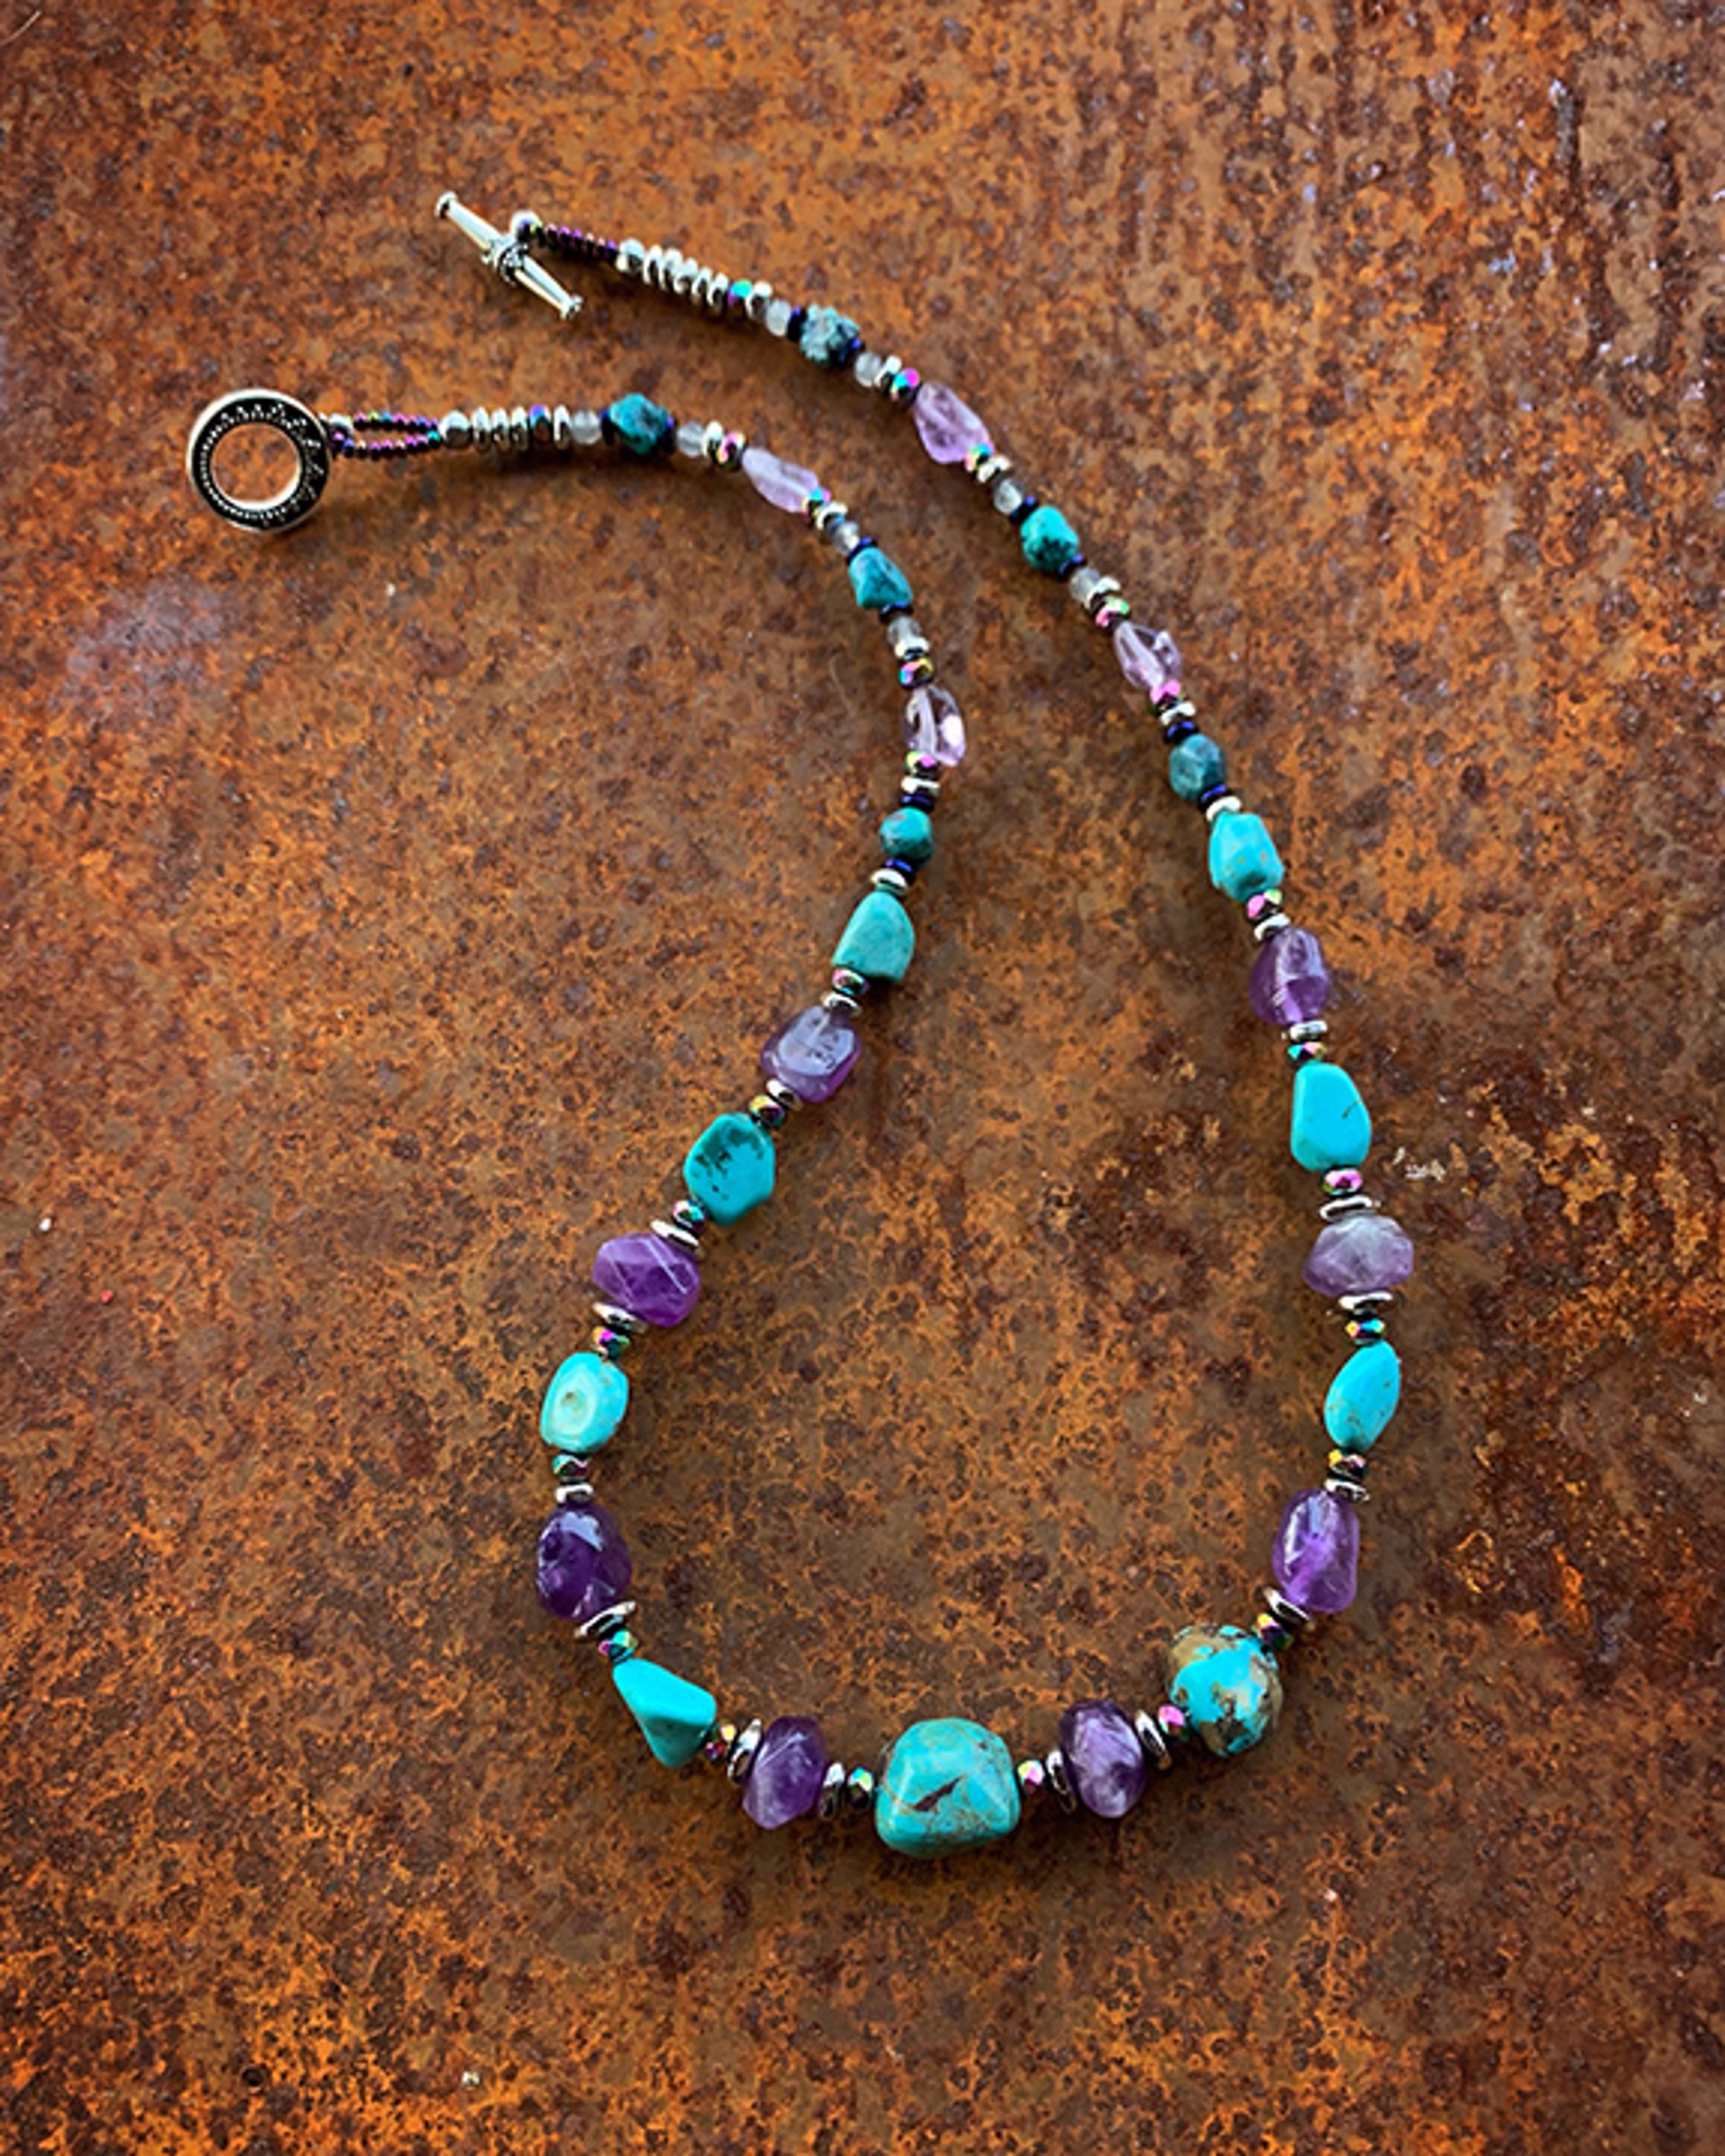 731	Turquoise and Amethyst Necklace by Kelly Ormsby